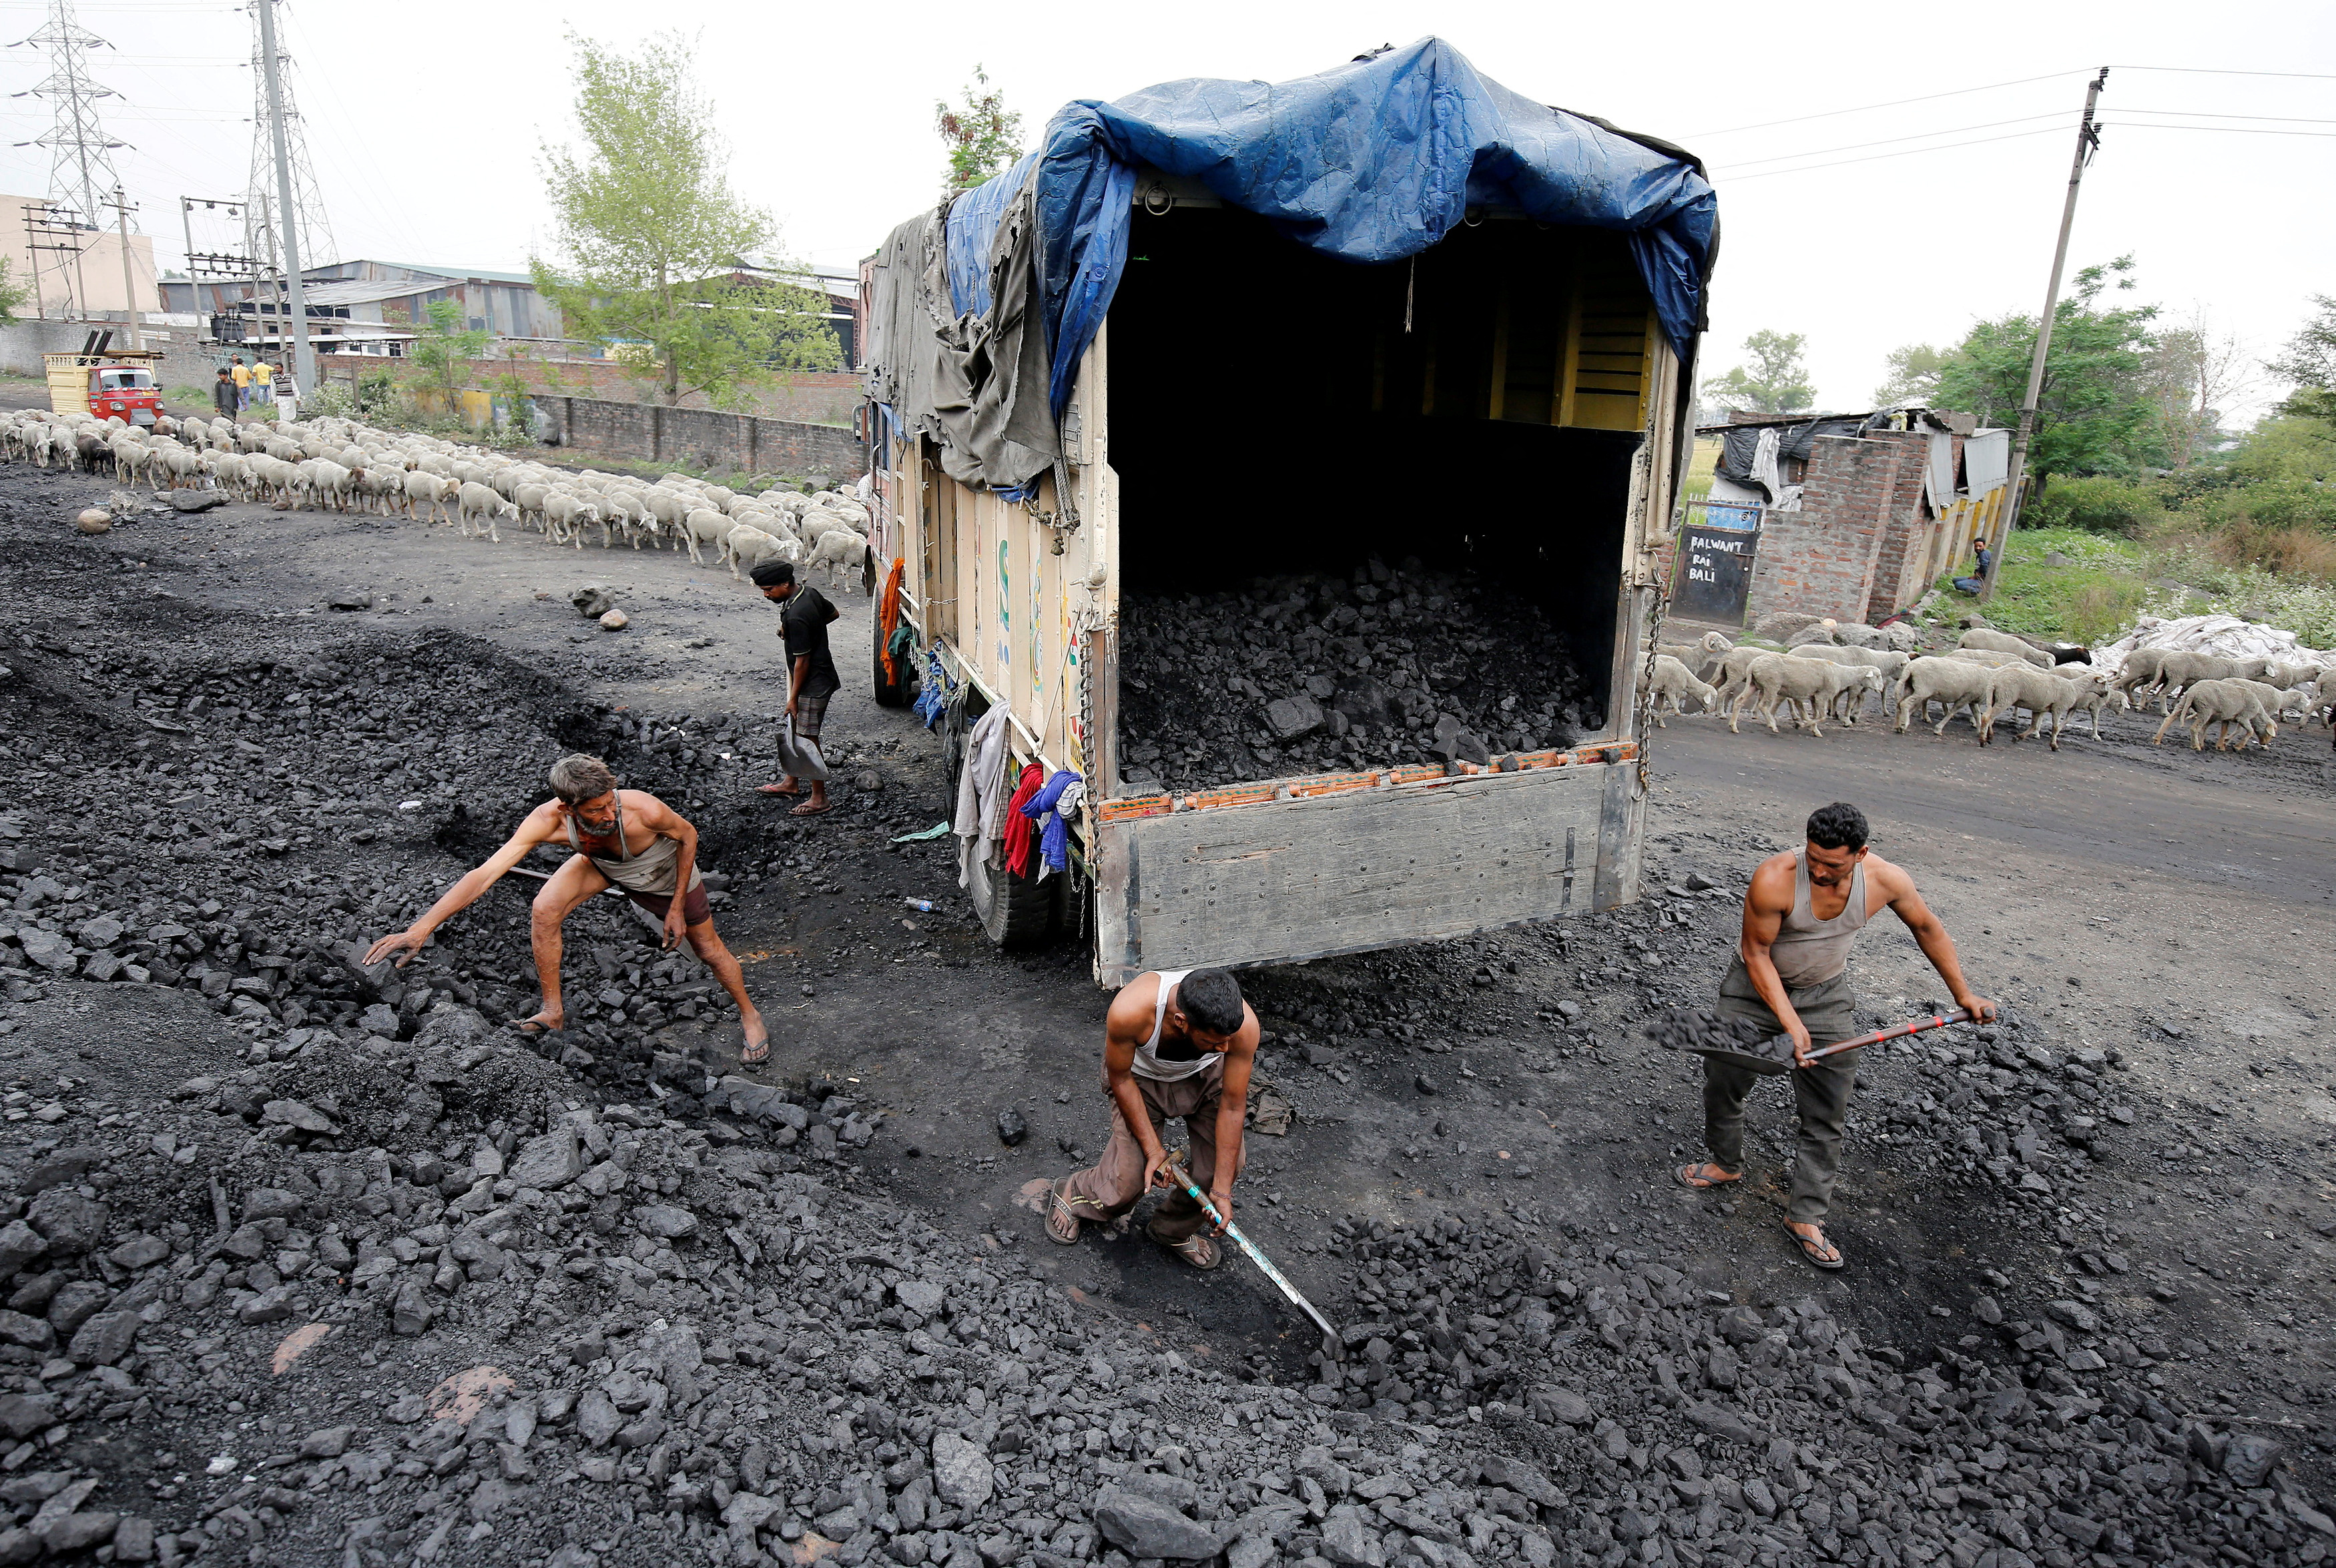 Labourers load coal onto a supply truck on the outskirts of Jammu